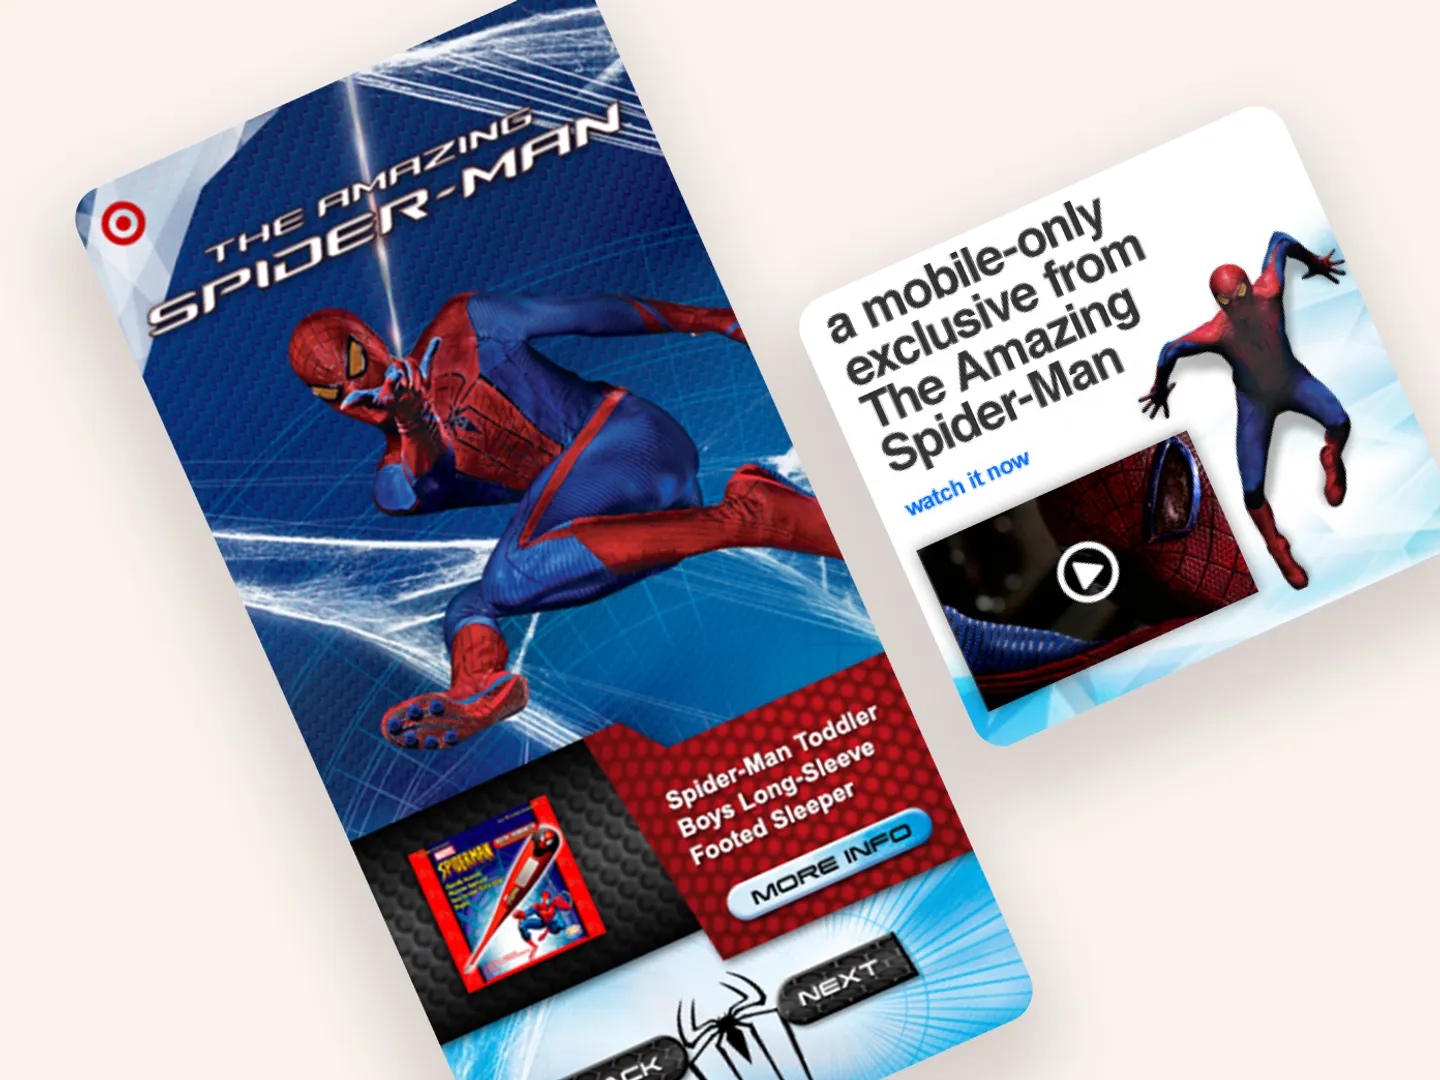 Composite image of work done for a Spiderman campaign at Target